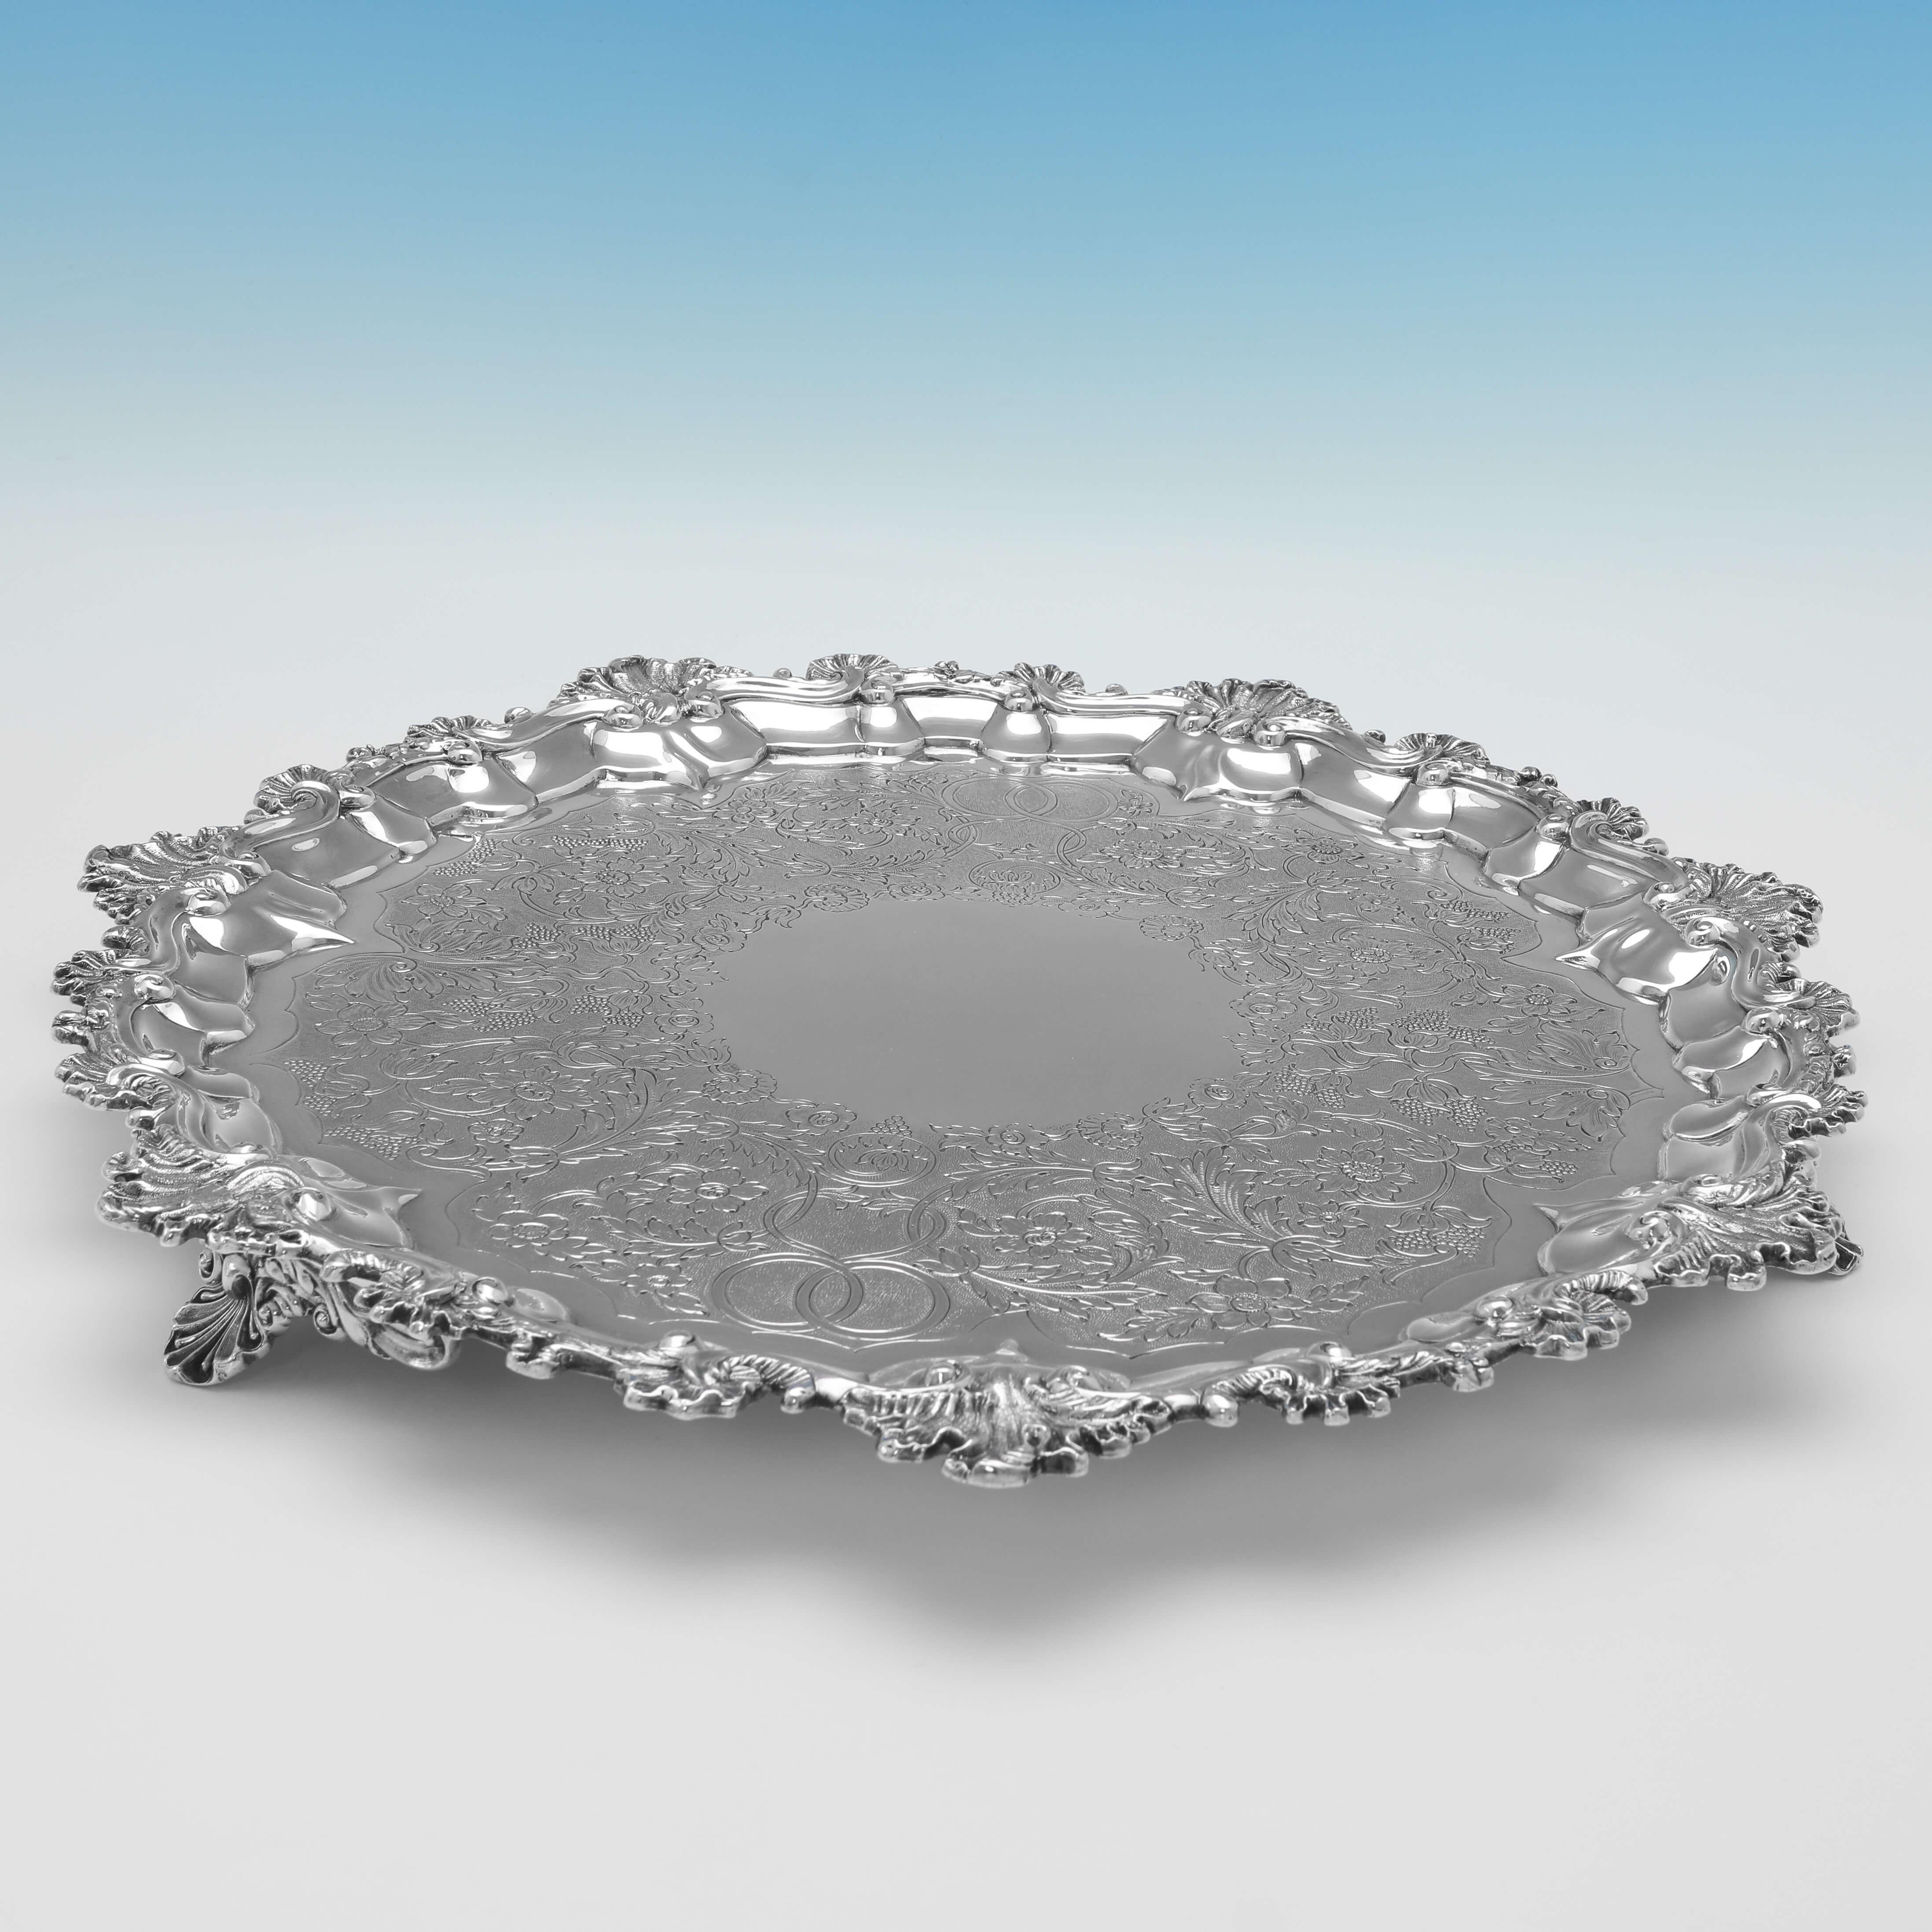 Hallmarked in London in 1836 by Hayne & Cater, this attractive, William IV, Antique Sterling Silver Salver, stands on three shell feet, and features a shell and scroll border, and flat chased decoration to the centre. 

The salver measures